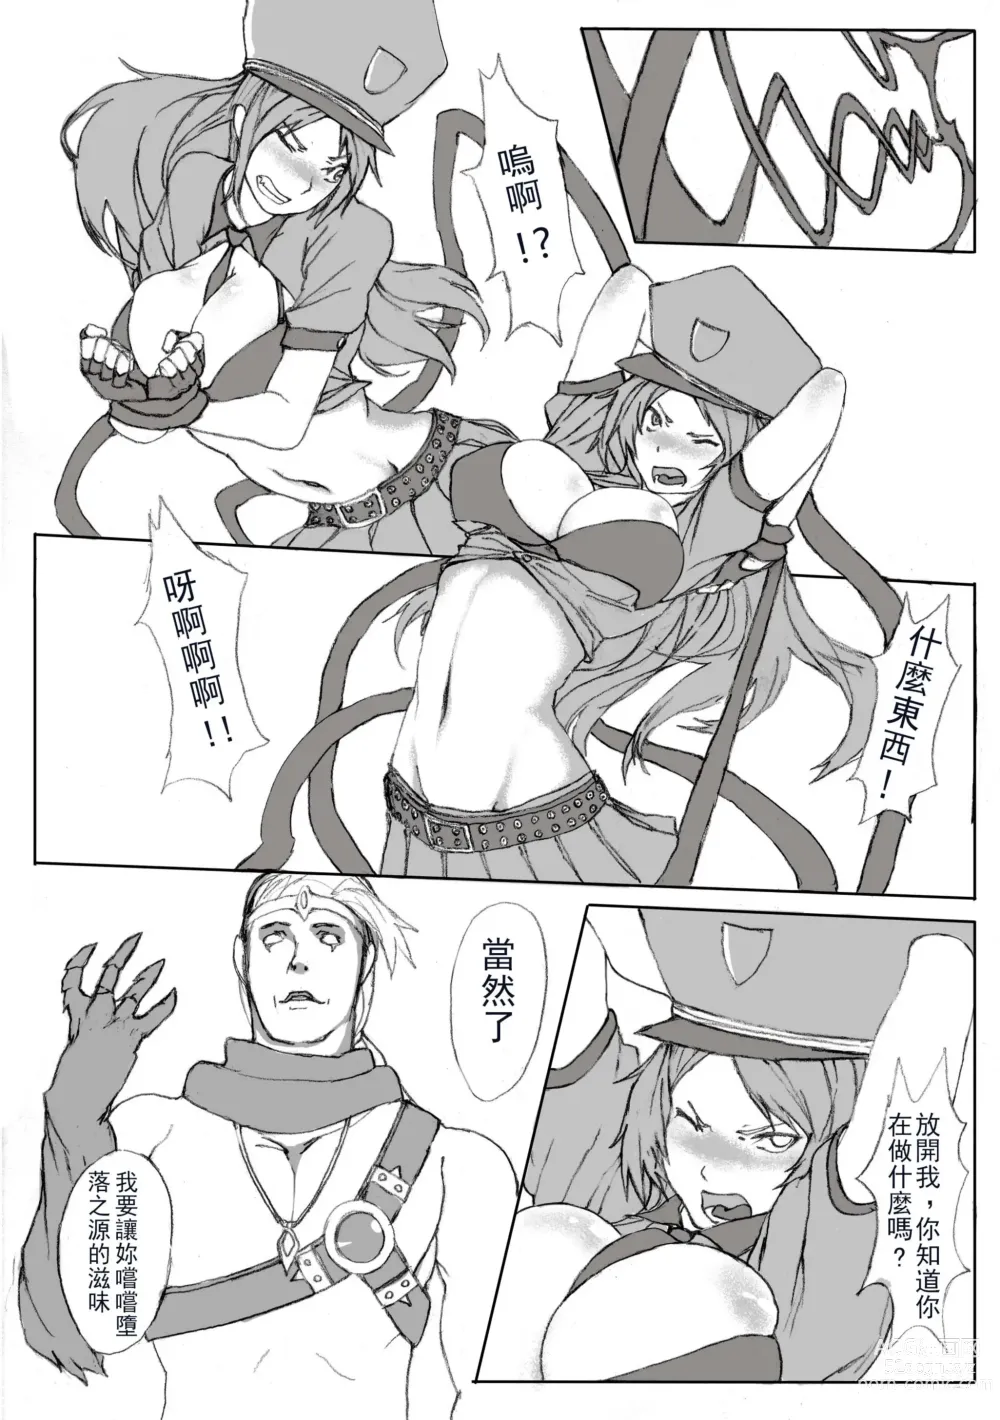 Page 4 of doujinshi 凱特琳壞壞 (League of Legends) [無修正]中文